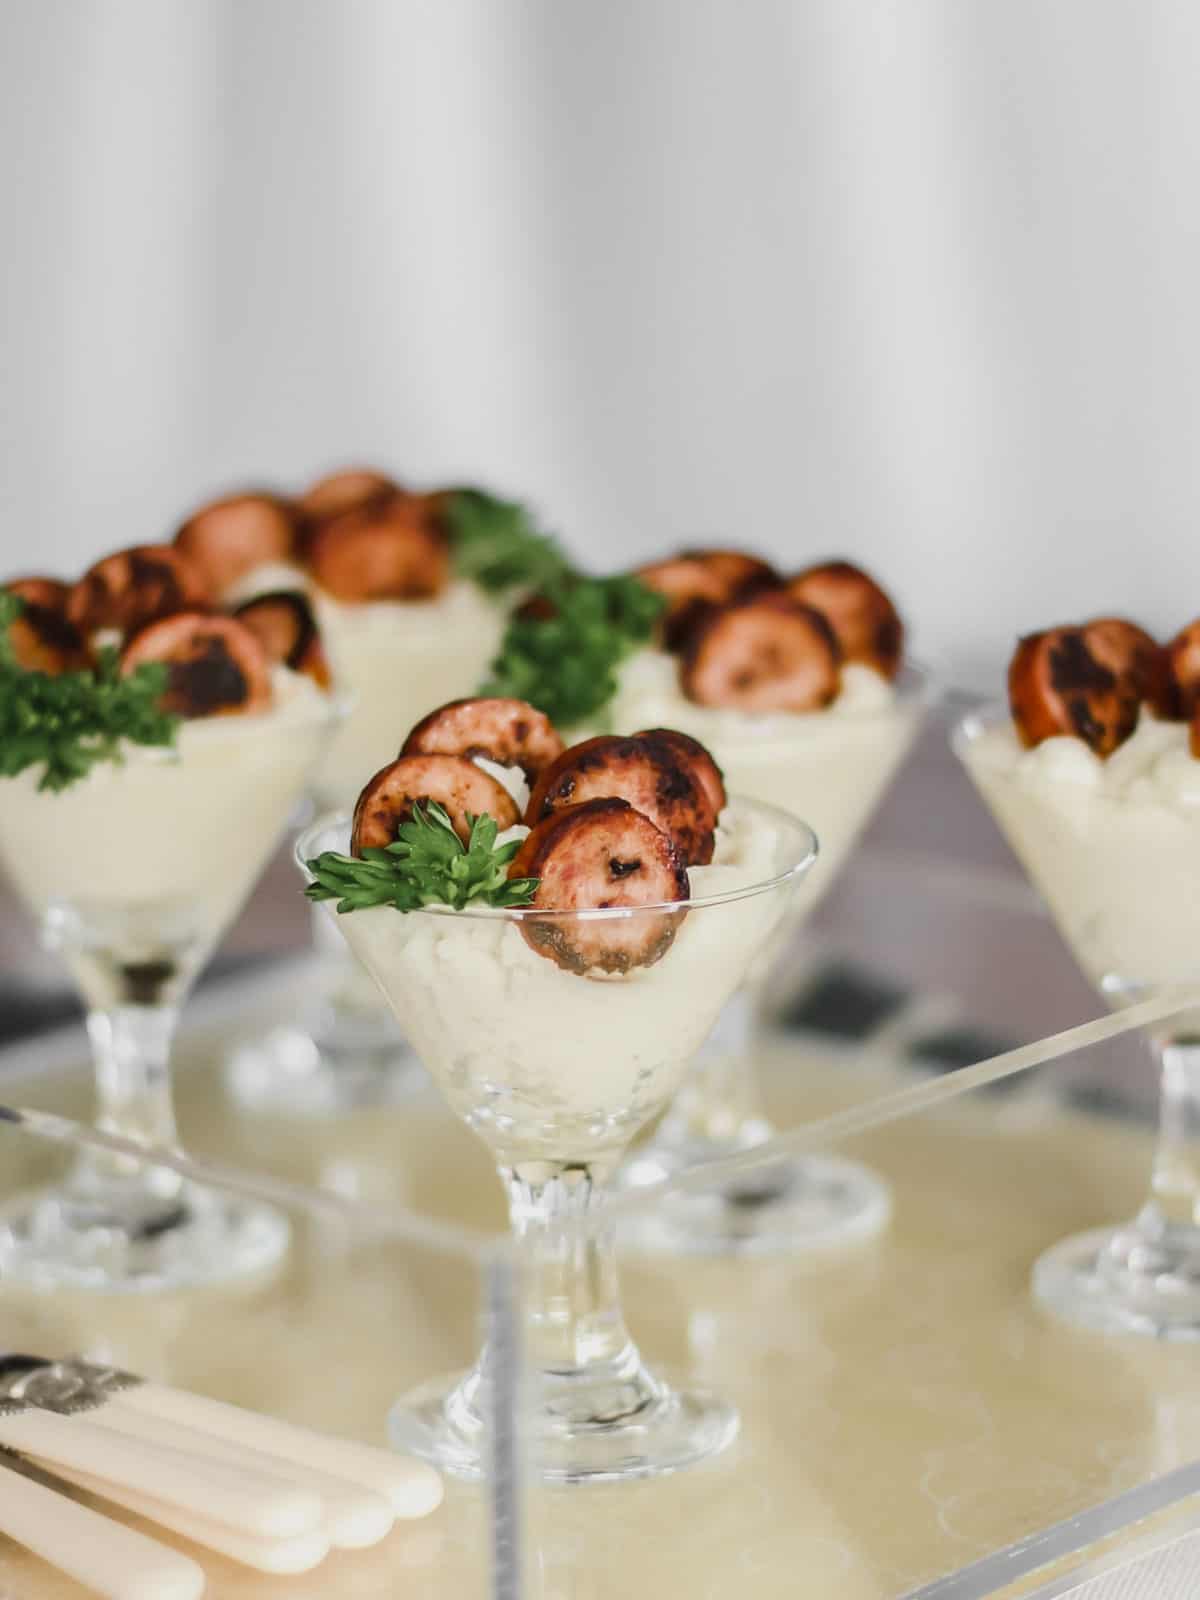 mini martini glasses filled with mashed potatoes and sausage medallions.